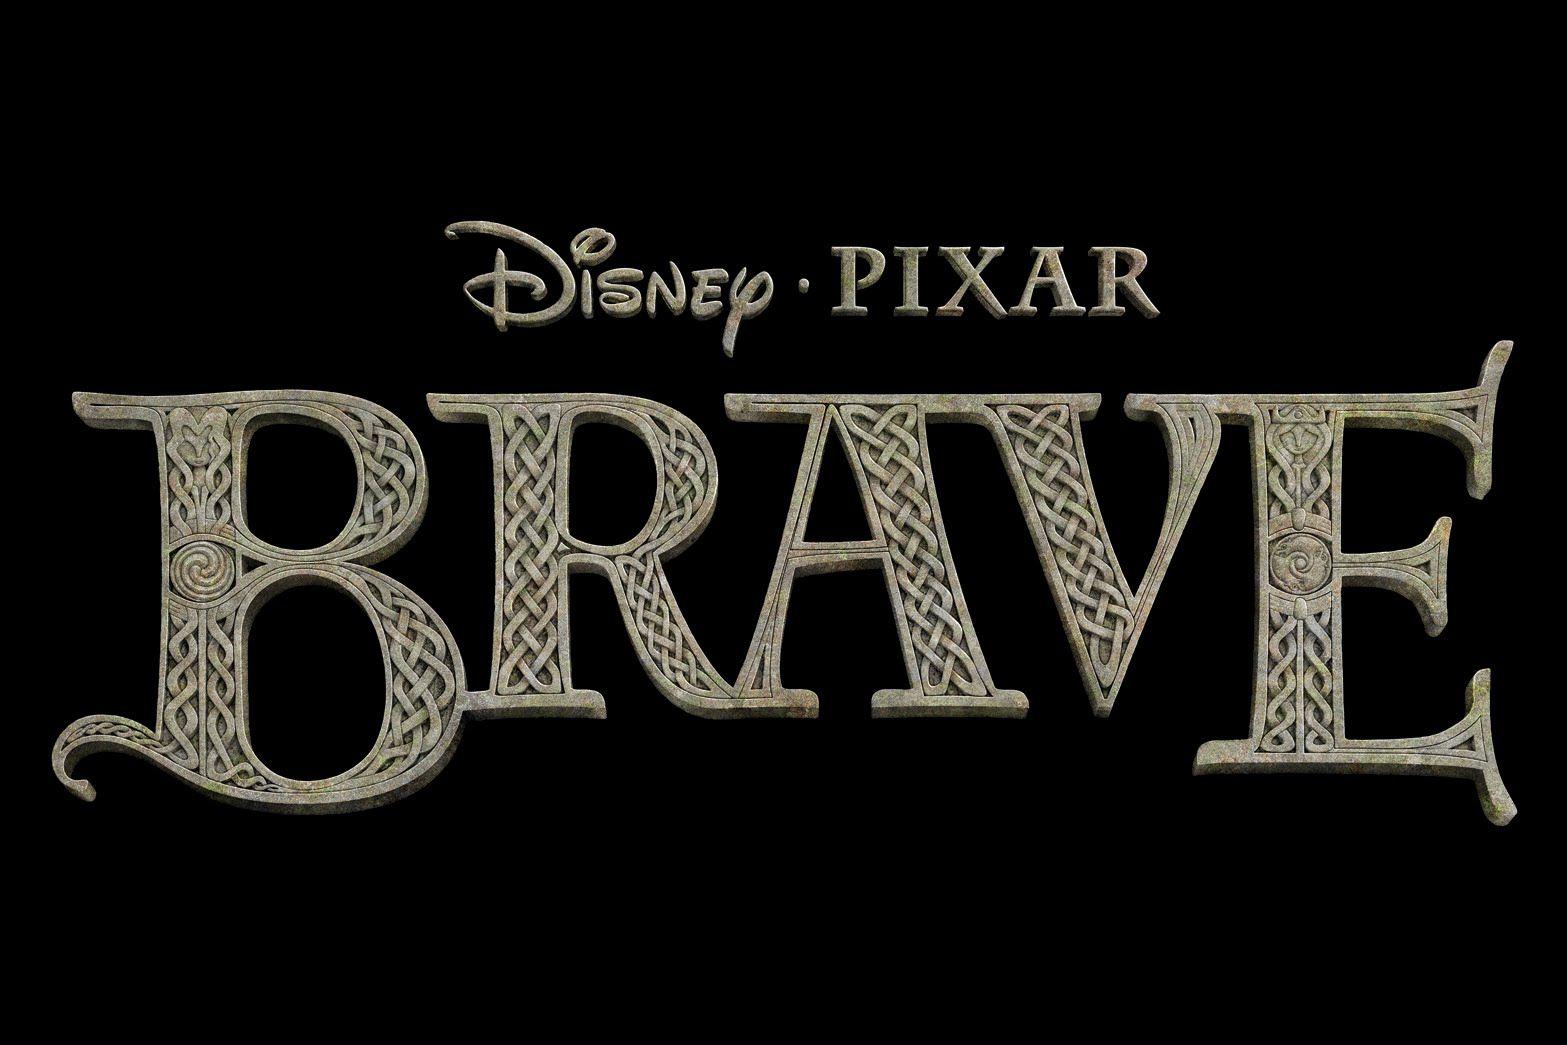 Disney Movie Title Logo - The “Brave” Situation | A Dreamer Walking